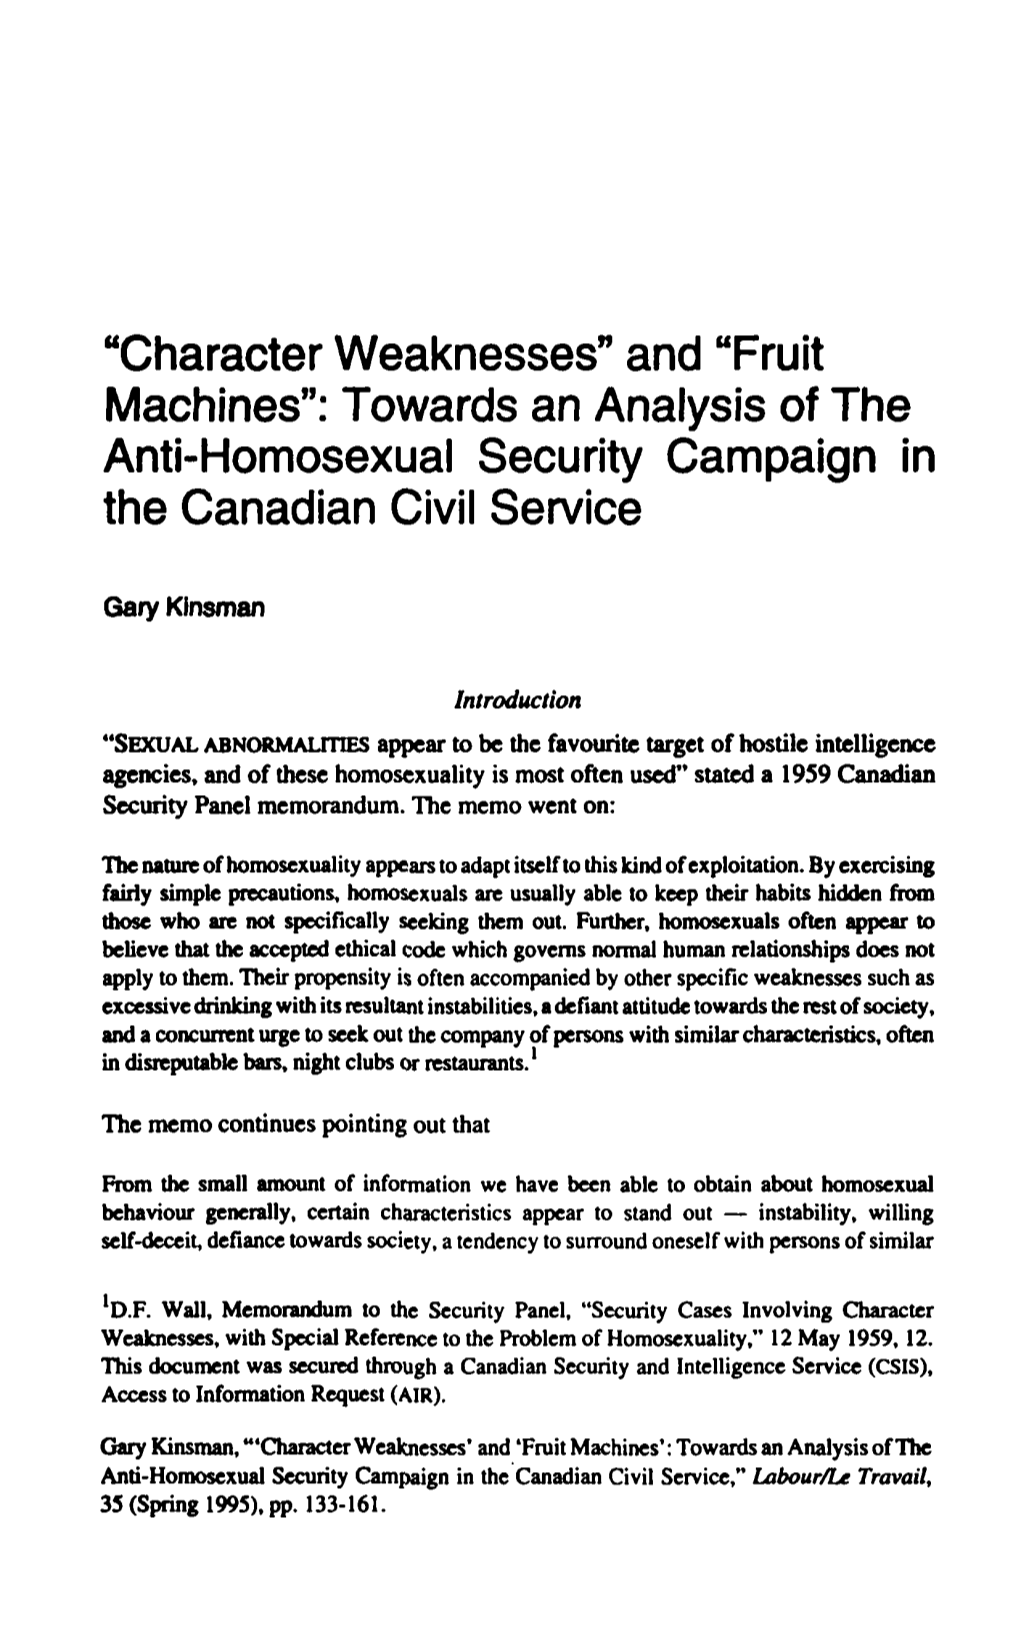 "Character Weaknesses" and "Fruit Machines": Towards an Analysis of the Anti-Homosexual Security Campaign in the Canadian Civil Service